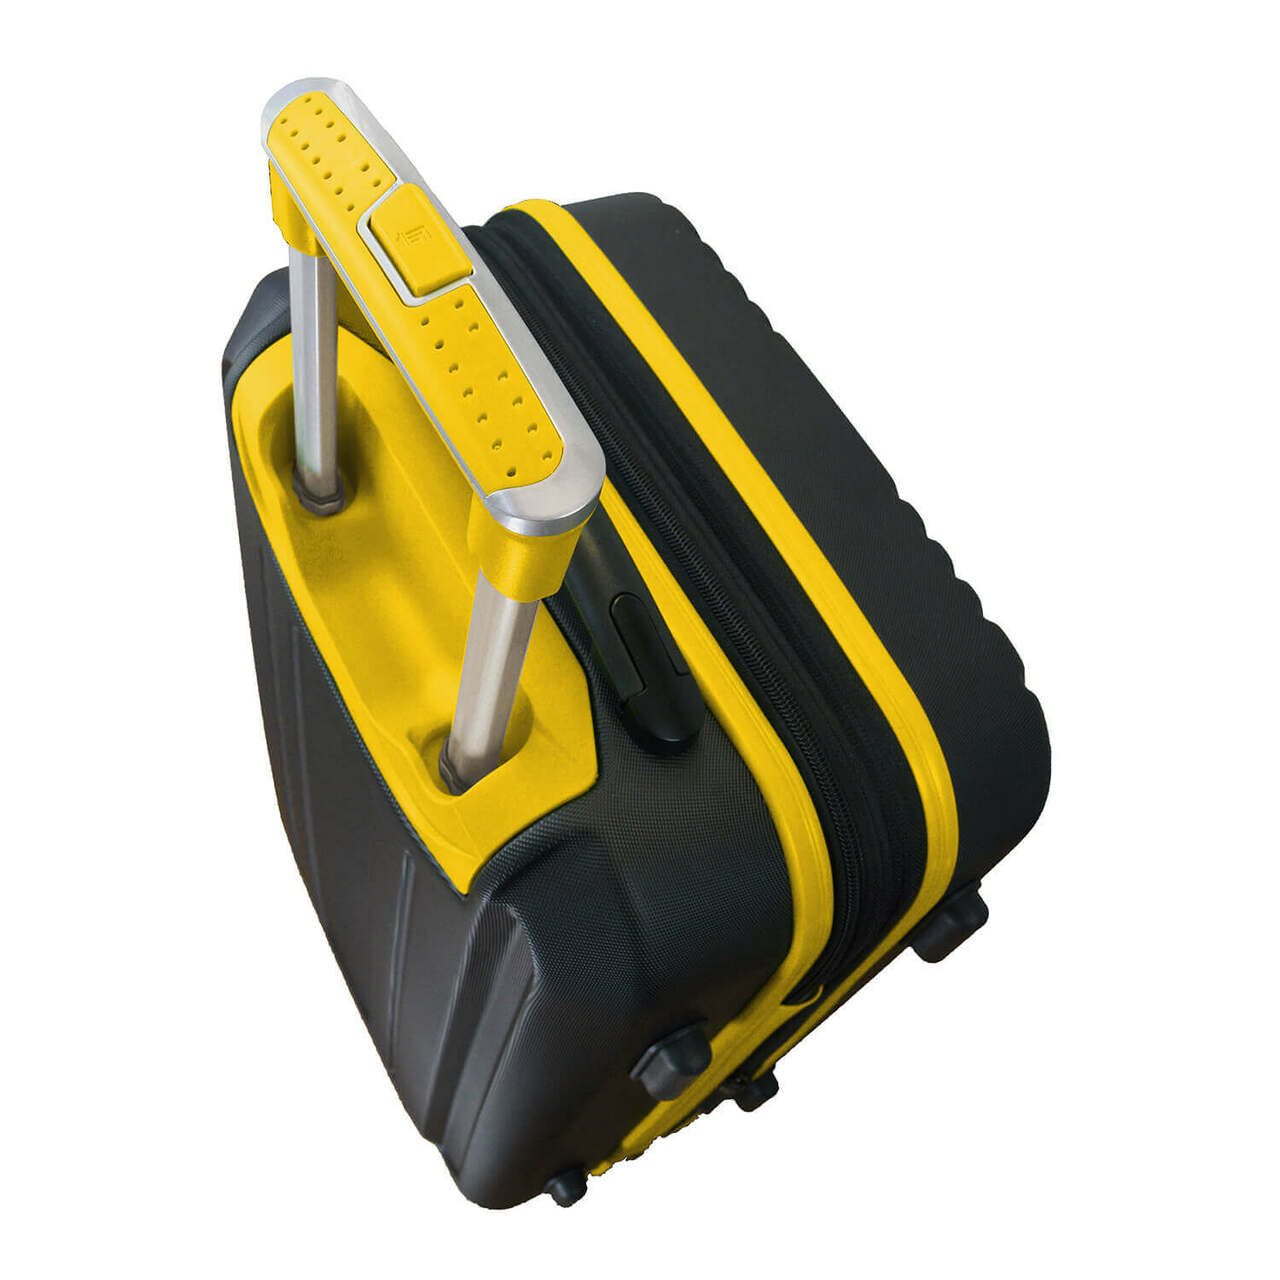 Mountaineers Carry On Spinner Luggage | Appalachian State Mountaineers Hardcase Two-Tone Luggage Carry-on Spinner in Yellow